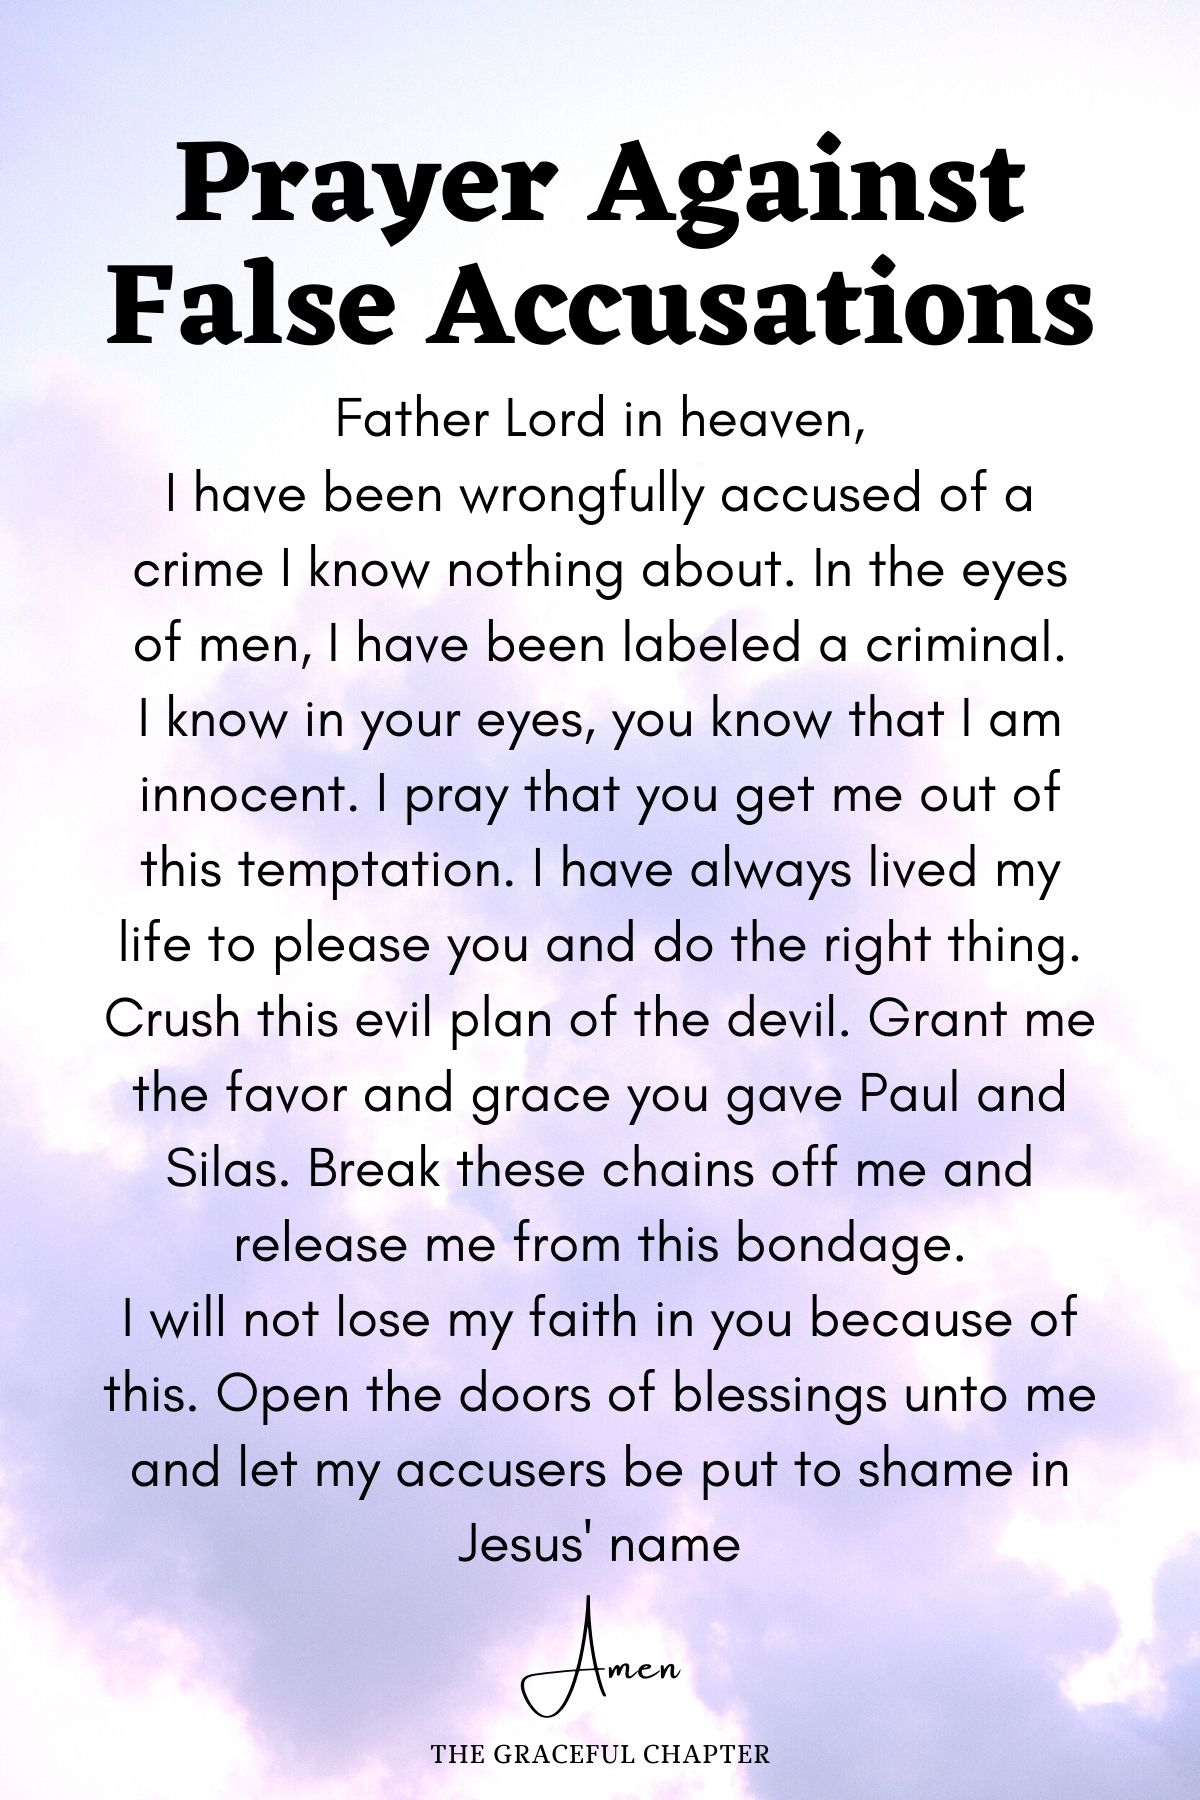 Prayer against false accusations - prayers for difficult situations